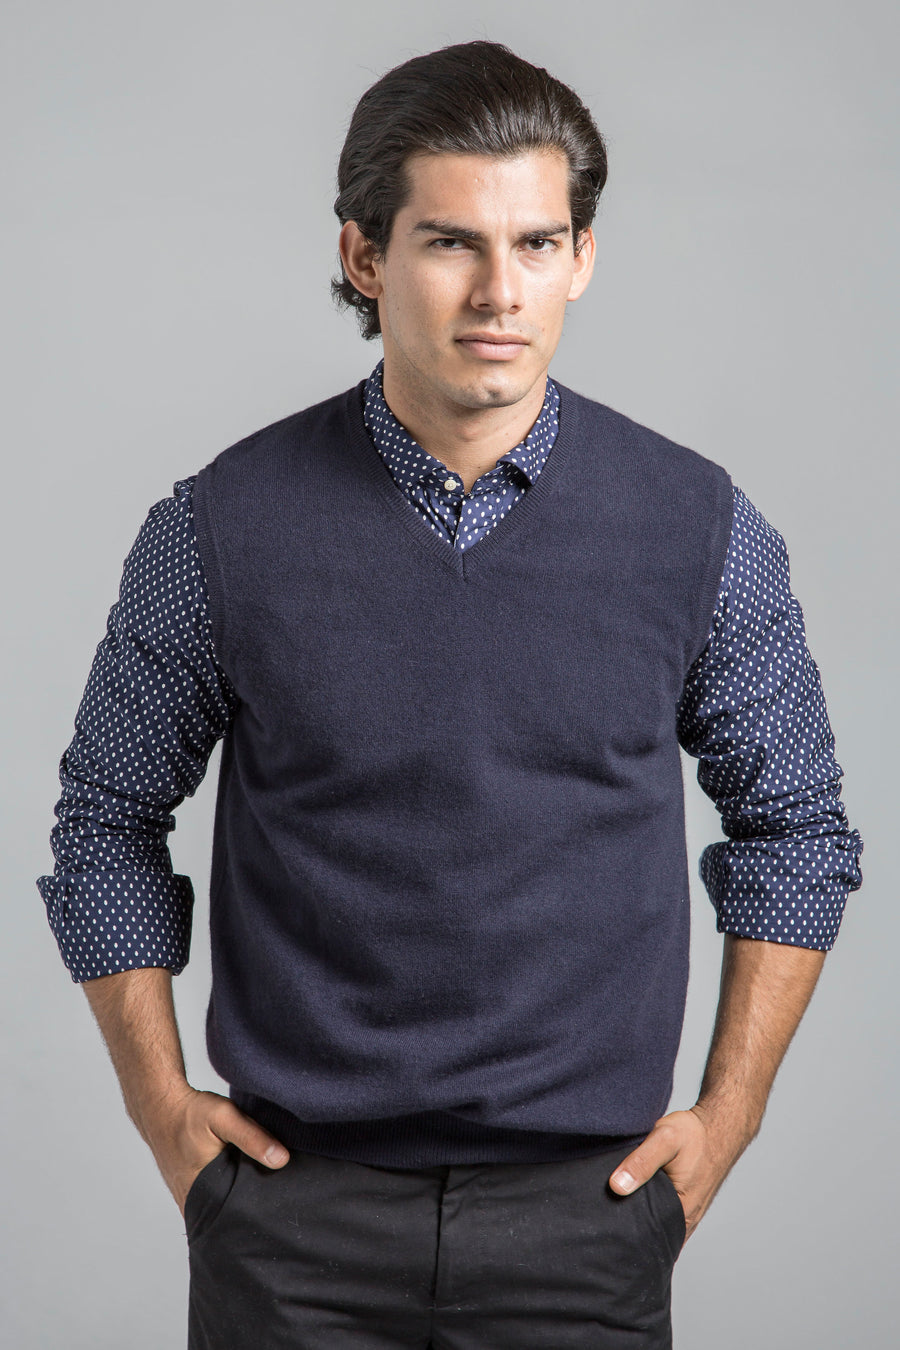 pine cashmere mens classic 100% pure cashmere v-neck sweater vest in navy